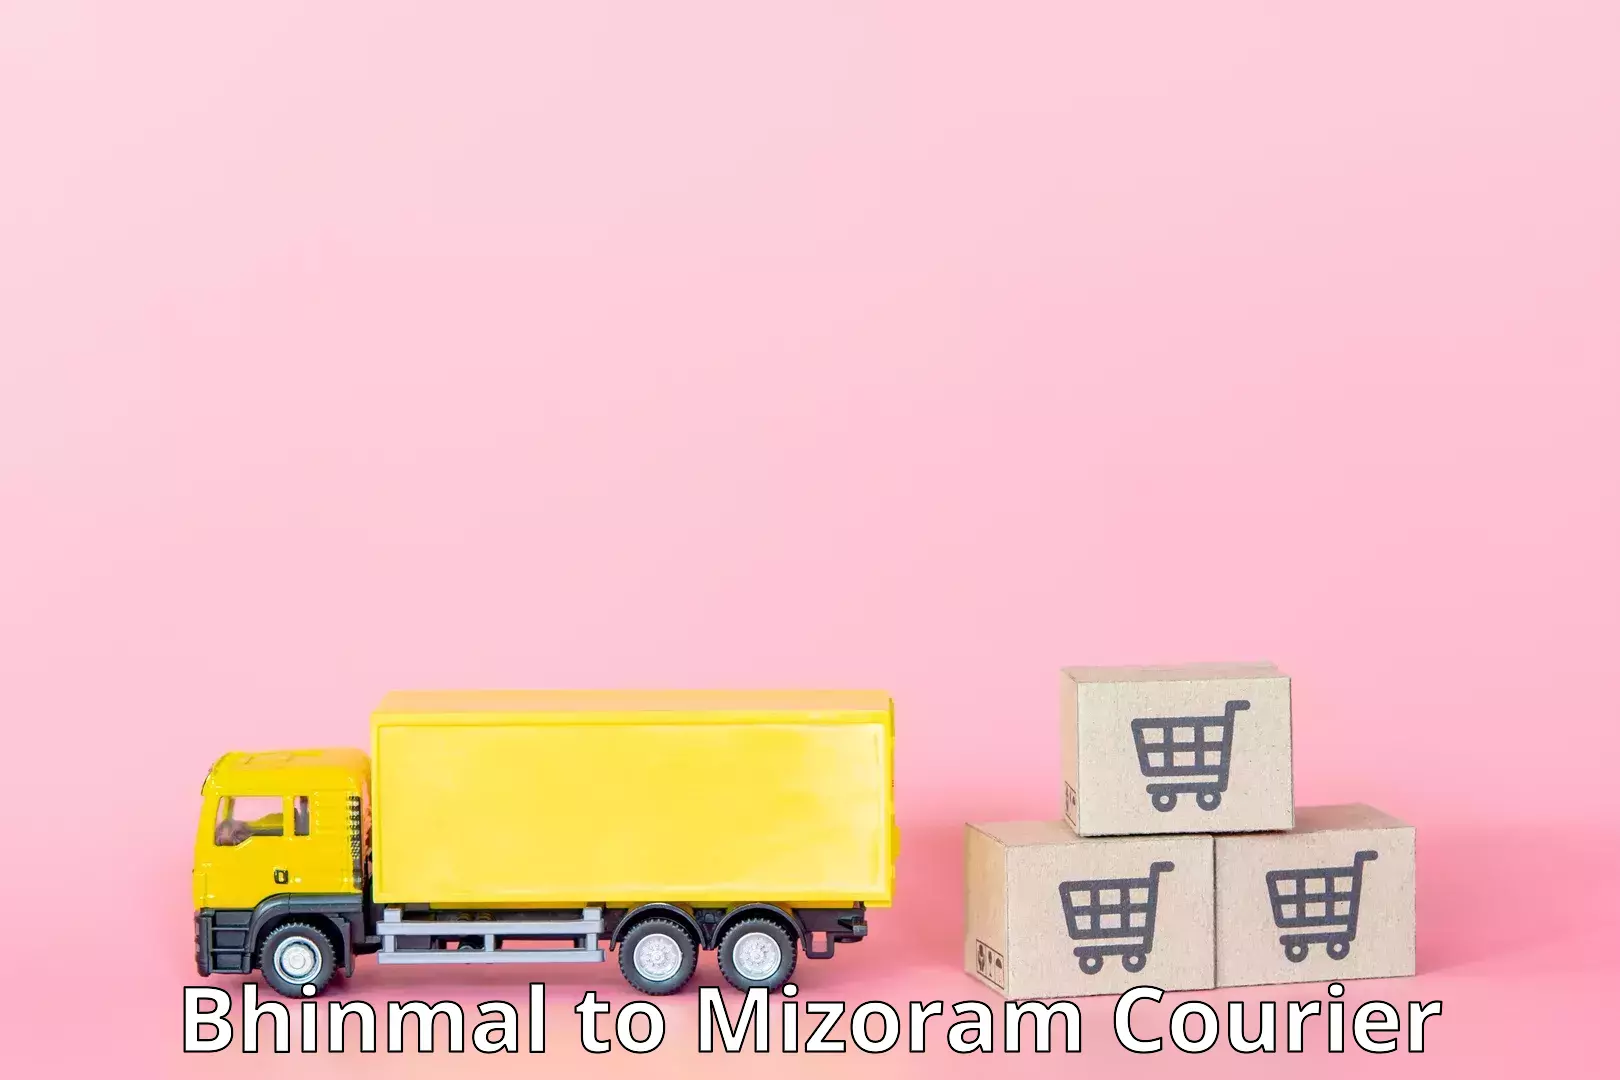 State-of-the-art courier technology in Bhinmal to Mizoram